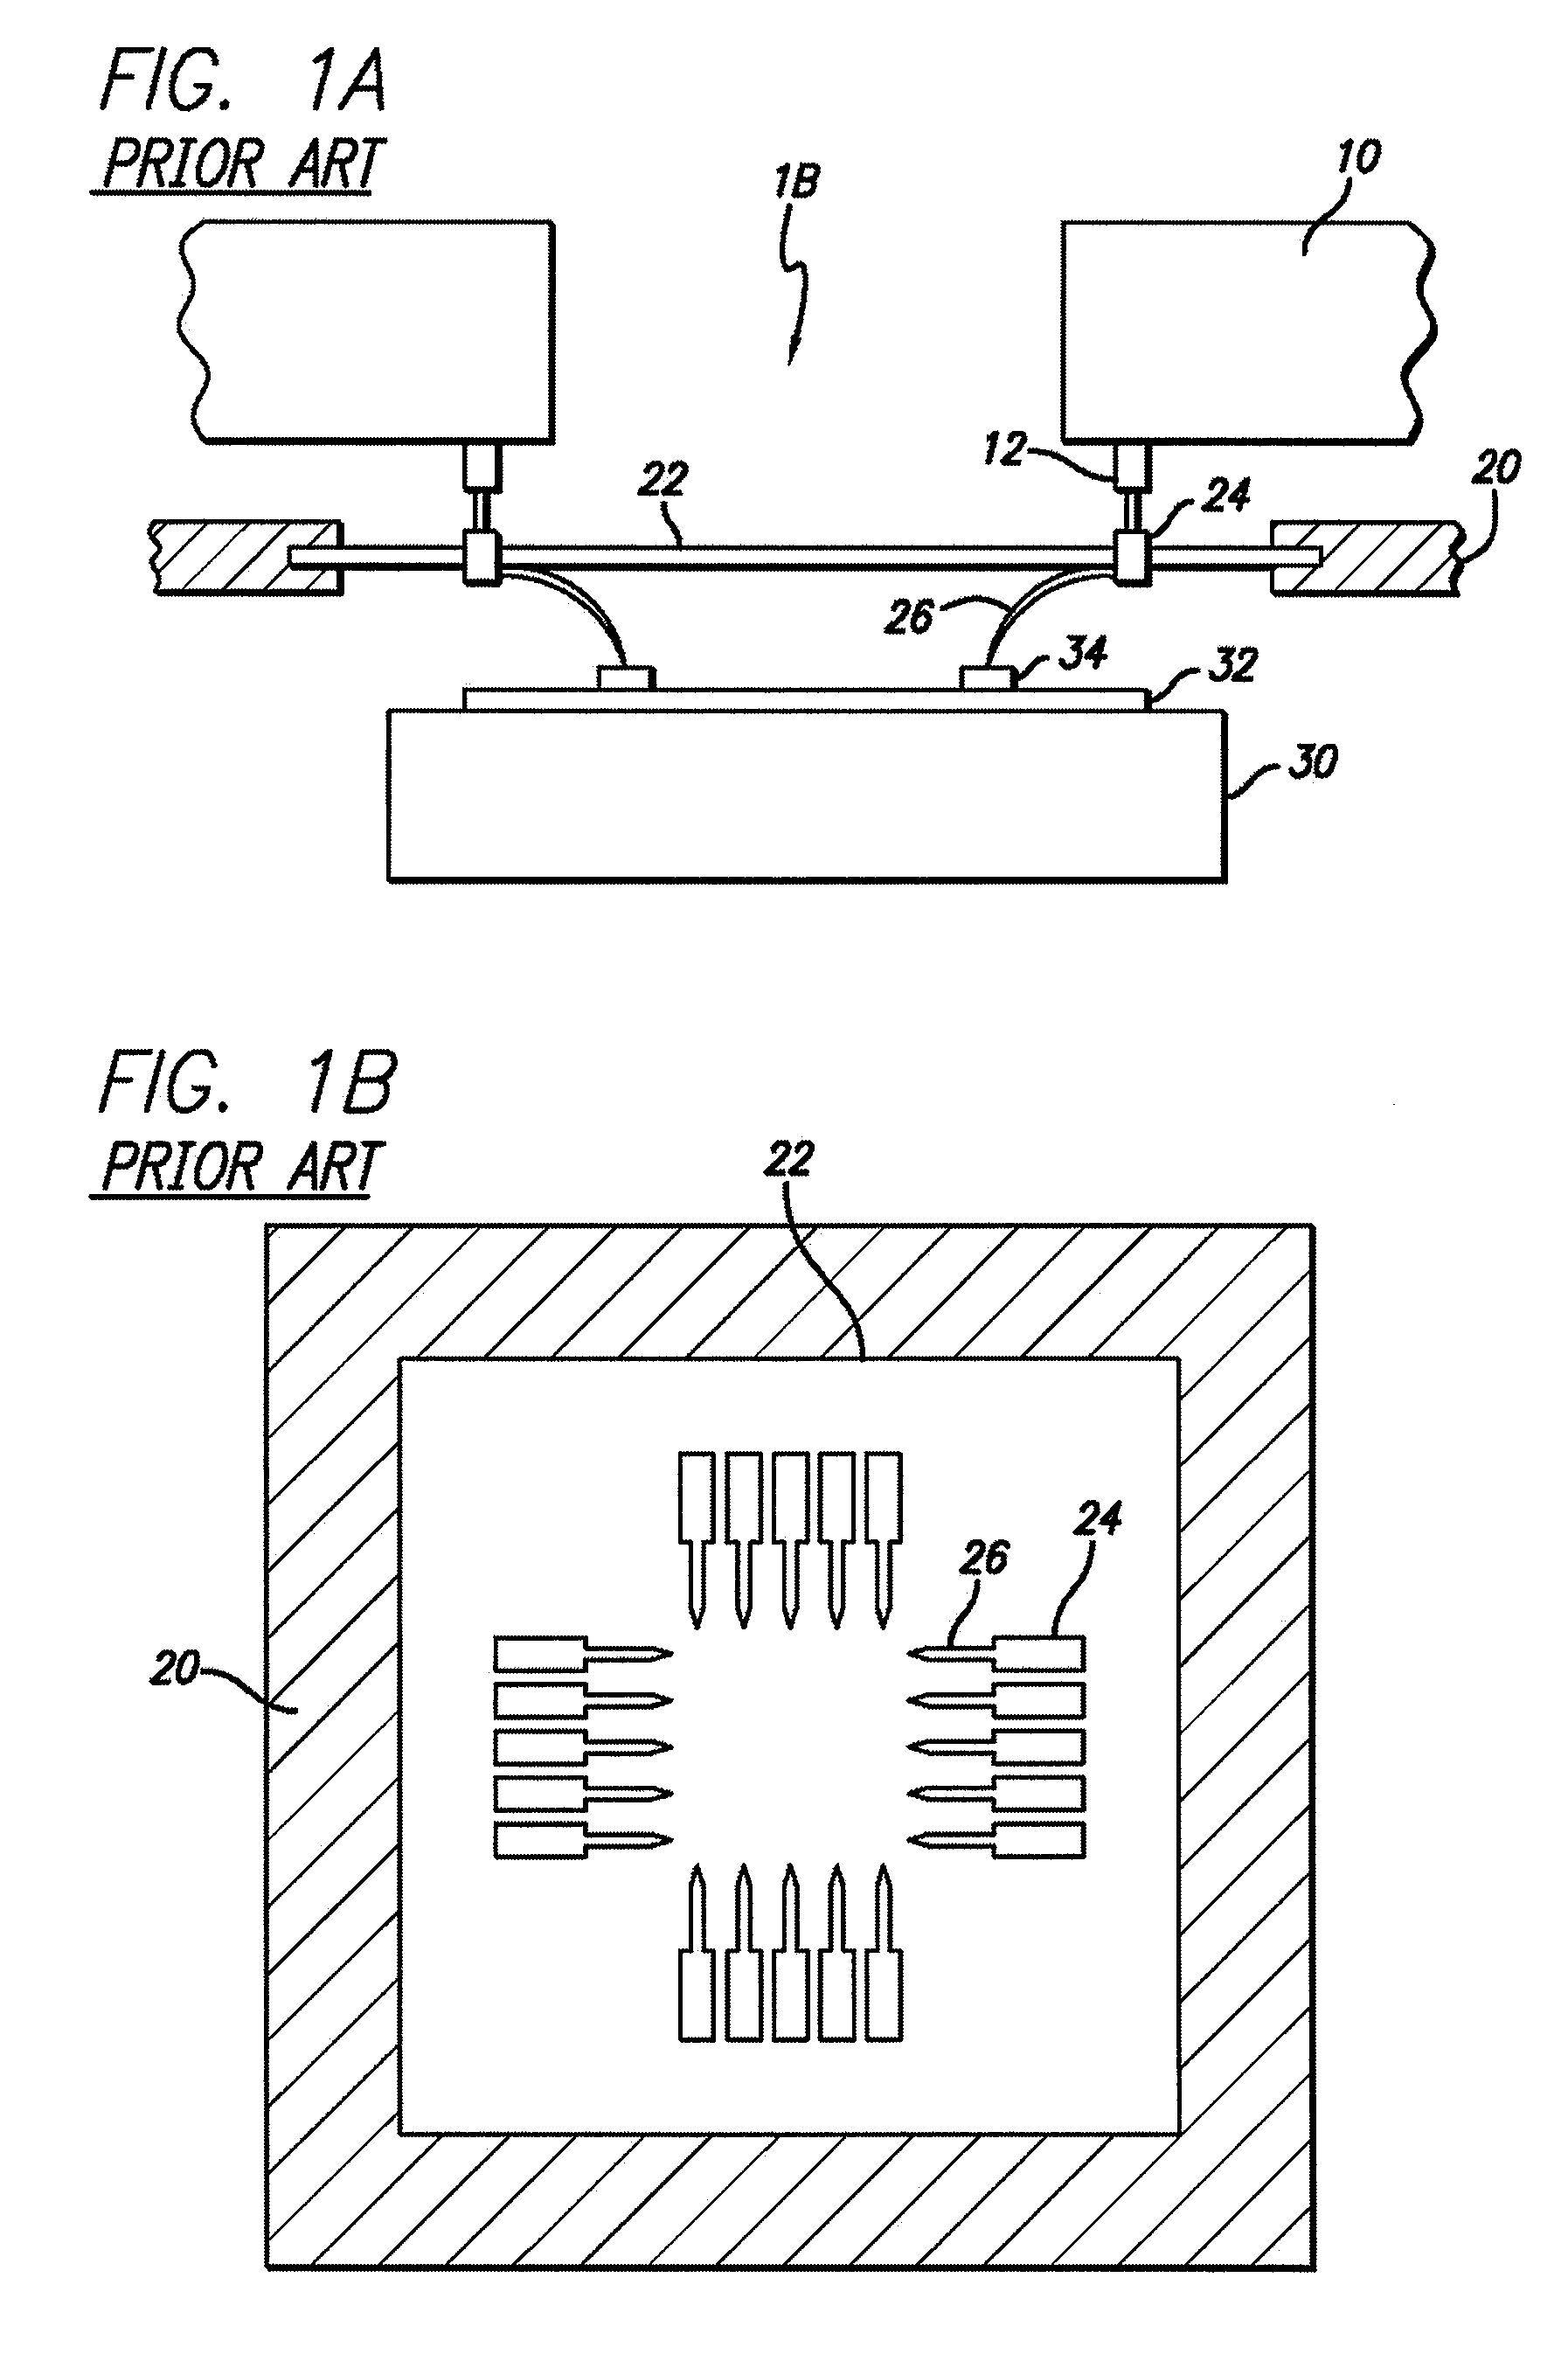 Method And System For Designing A Probe Card